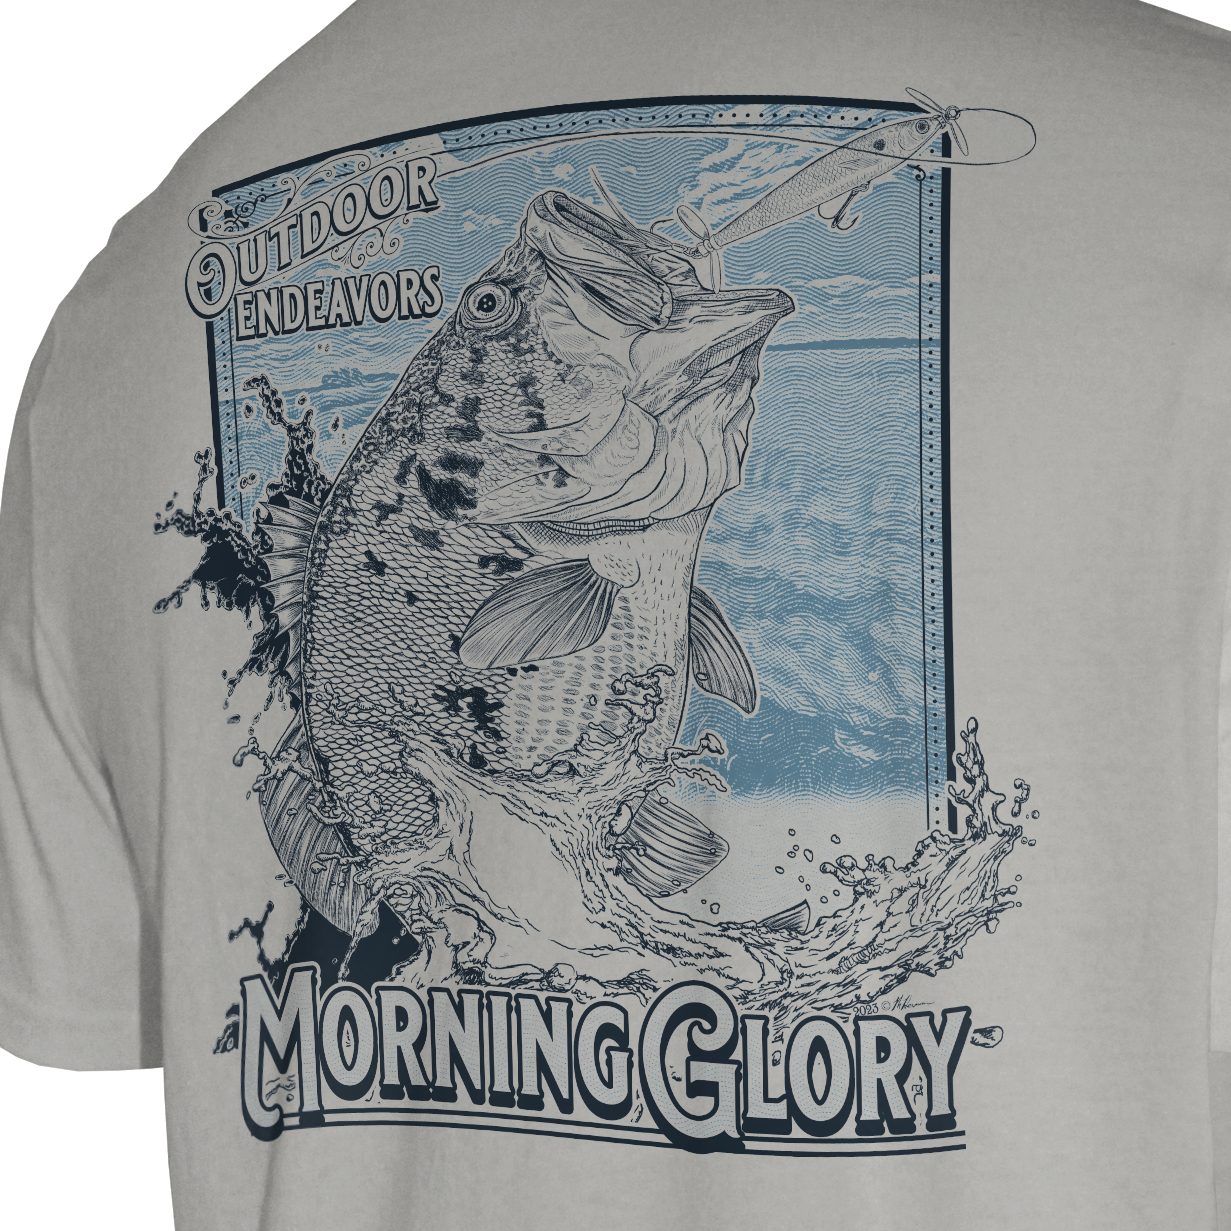 Outdoor Endeavors Classic - Short Sleeve Tee - Morning Glory